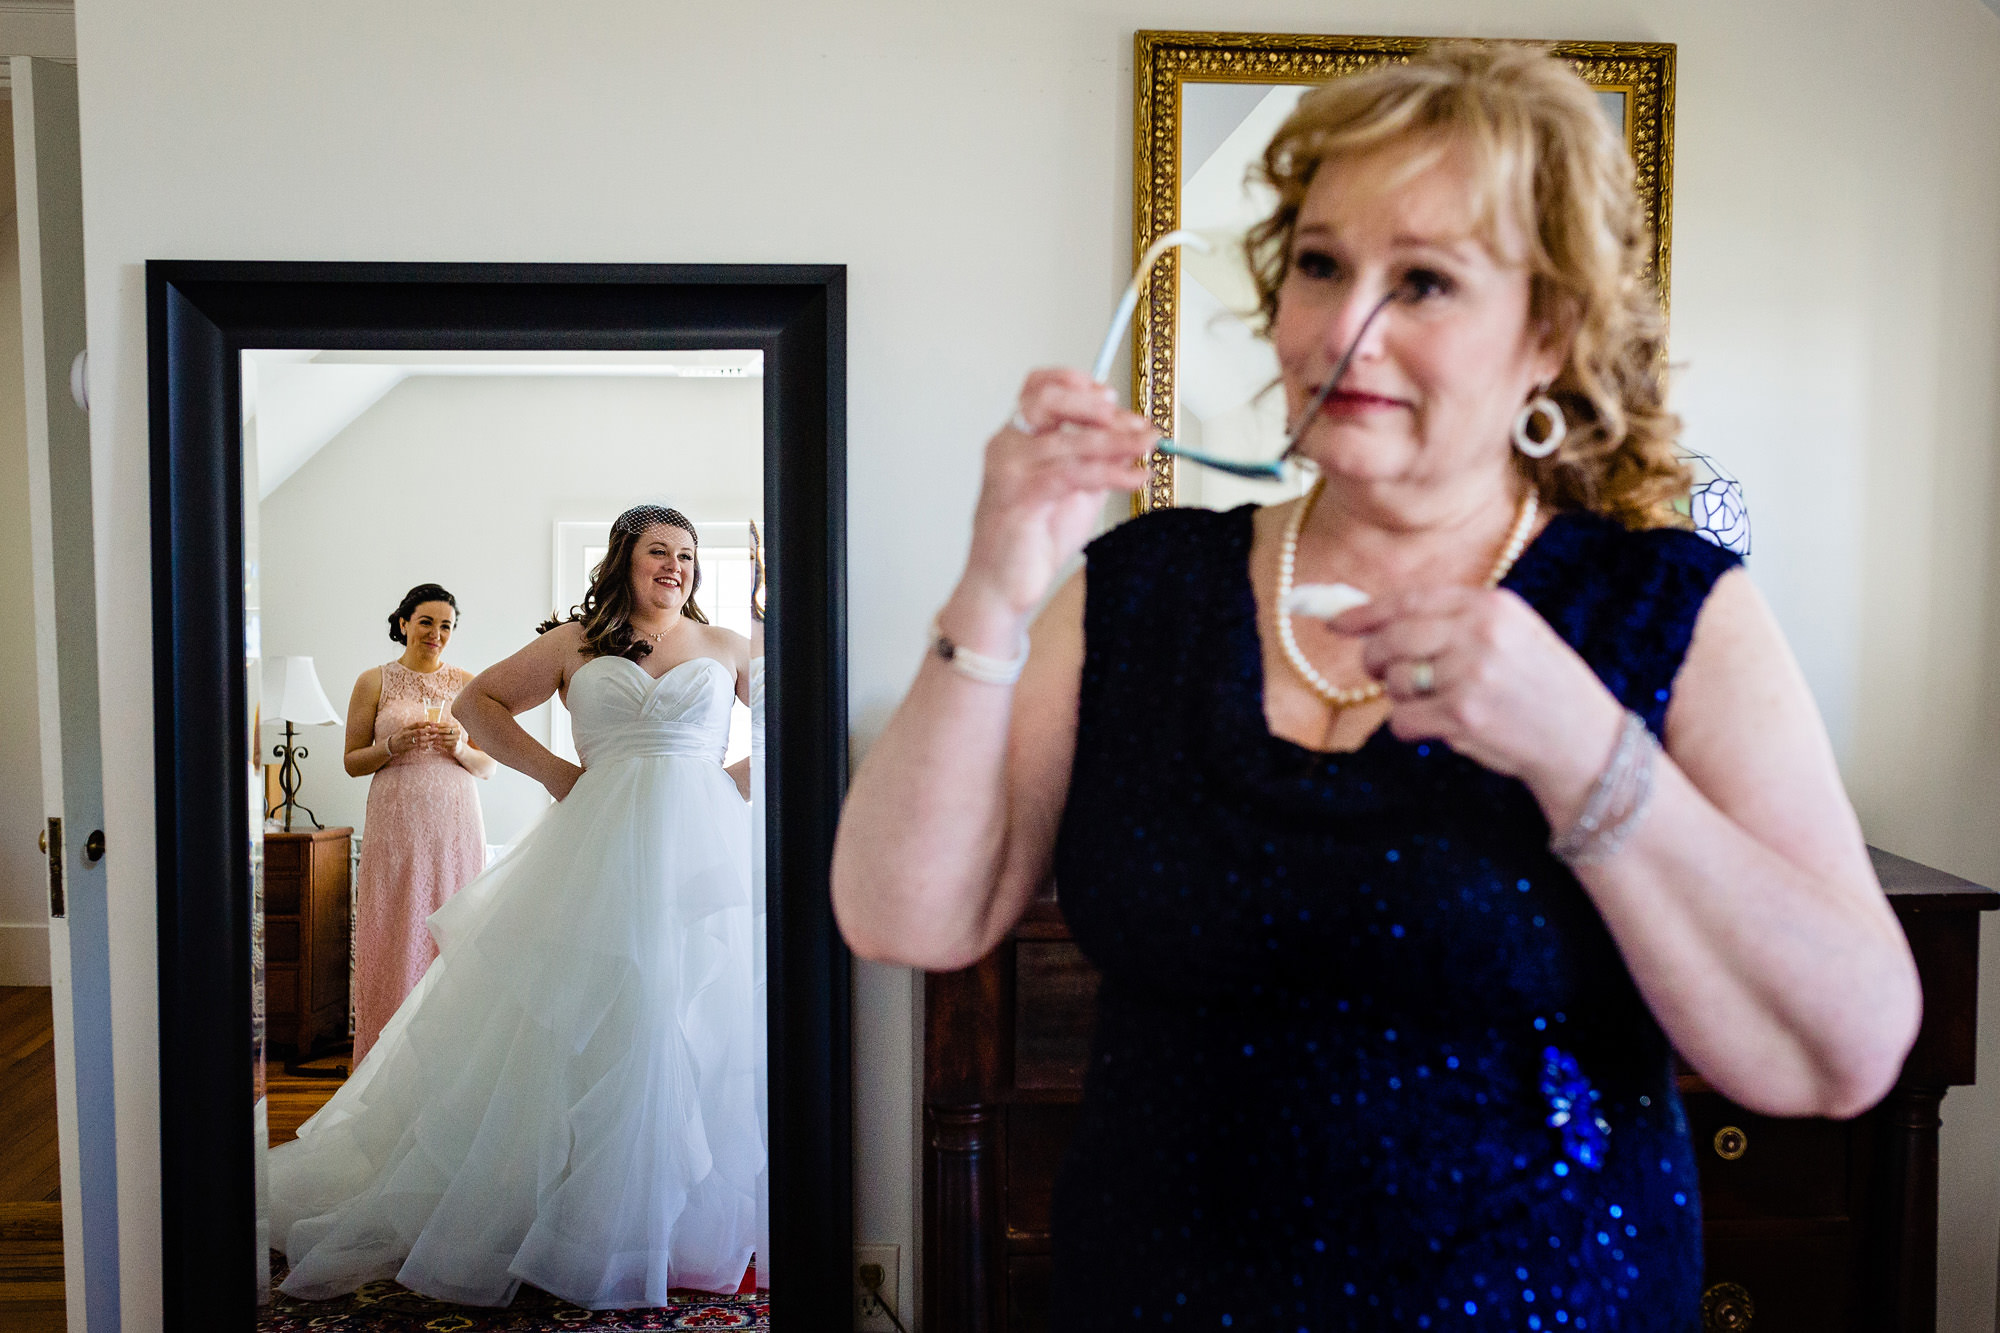 A mother of the bride cries as she sees her daughter in a wedding dress.